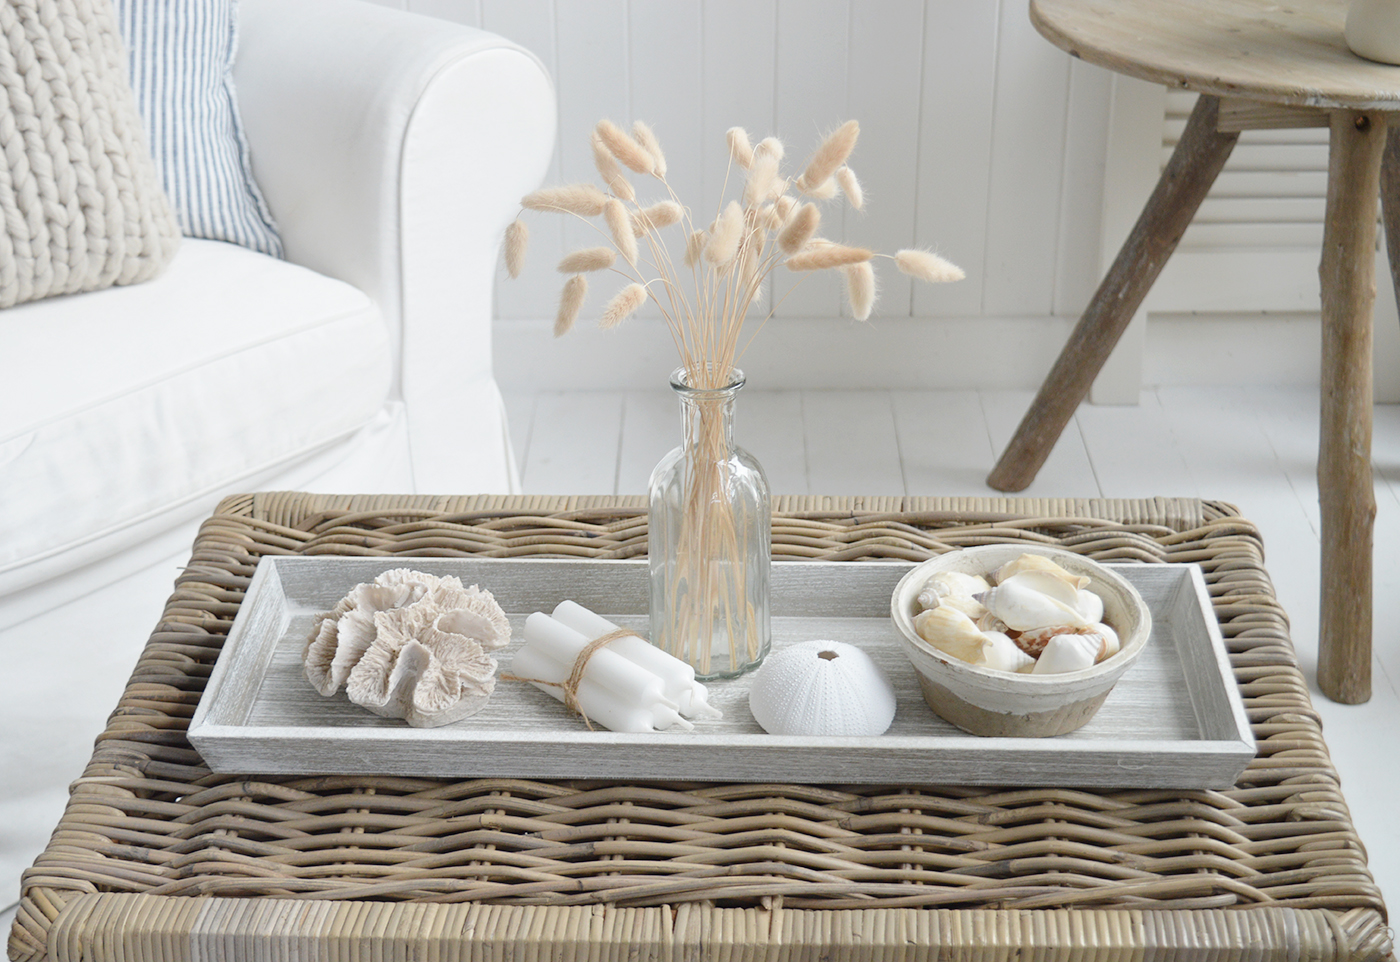 Berwick long tray for coffee table decor and styling Hamptons coastal style